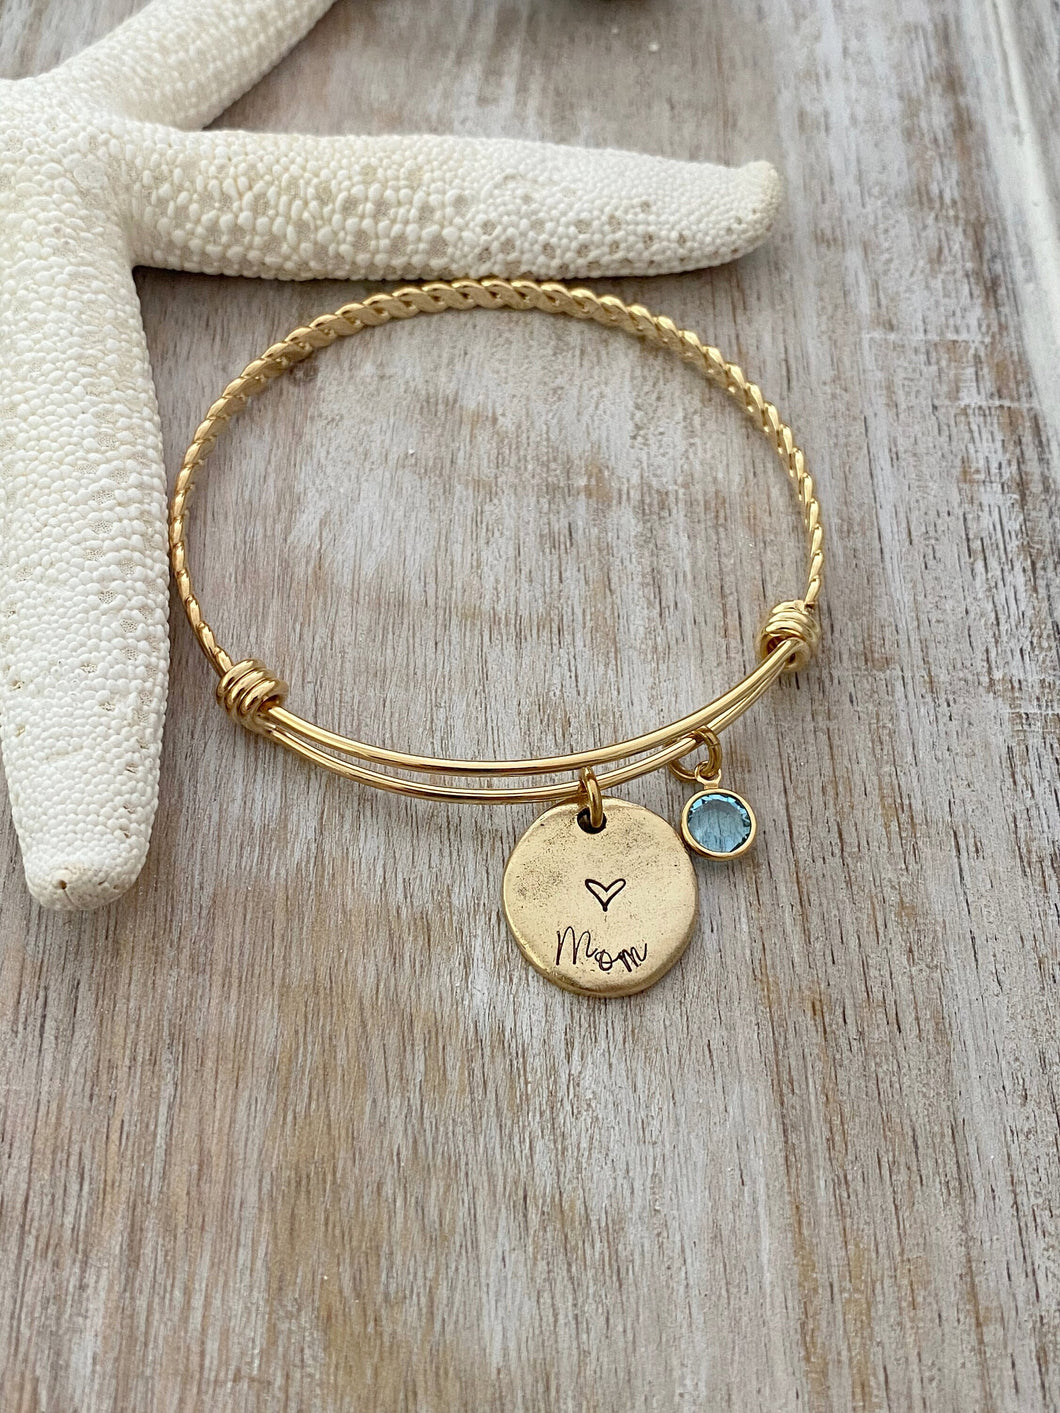 Gift for mom, gold plated or silver stainless steel bangle bracelet with personalized disc and birthstones, Christmas gift, grandma gift